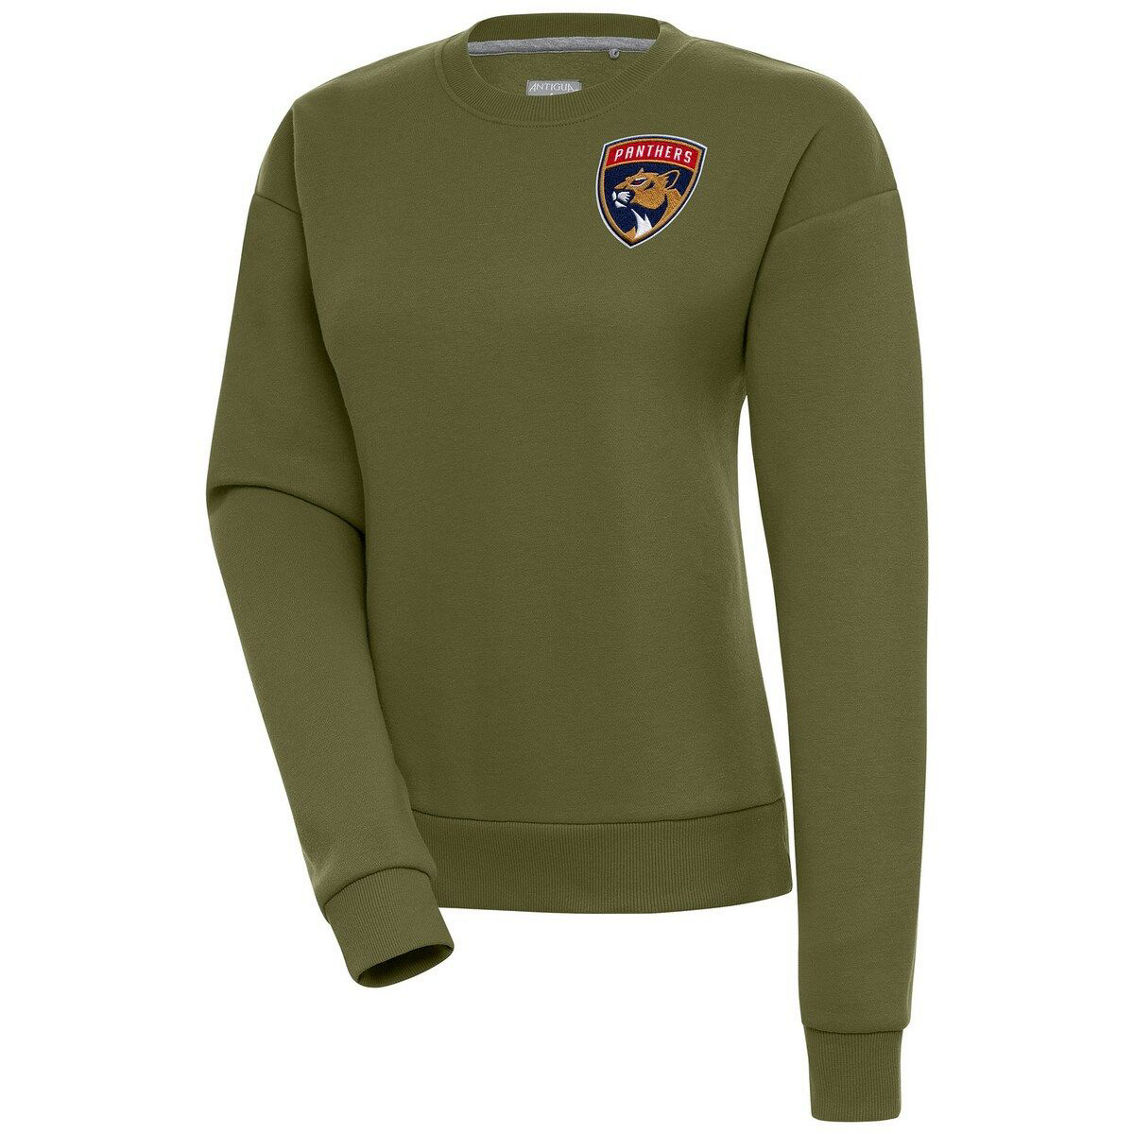 Antigua Women's Olive Florida Panthers Victory Pullover Sweatshirt - Image 2 of 2